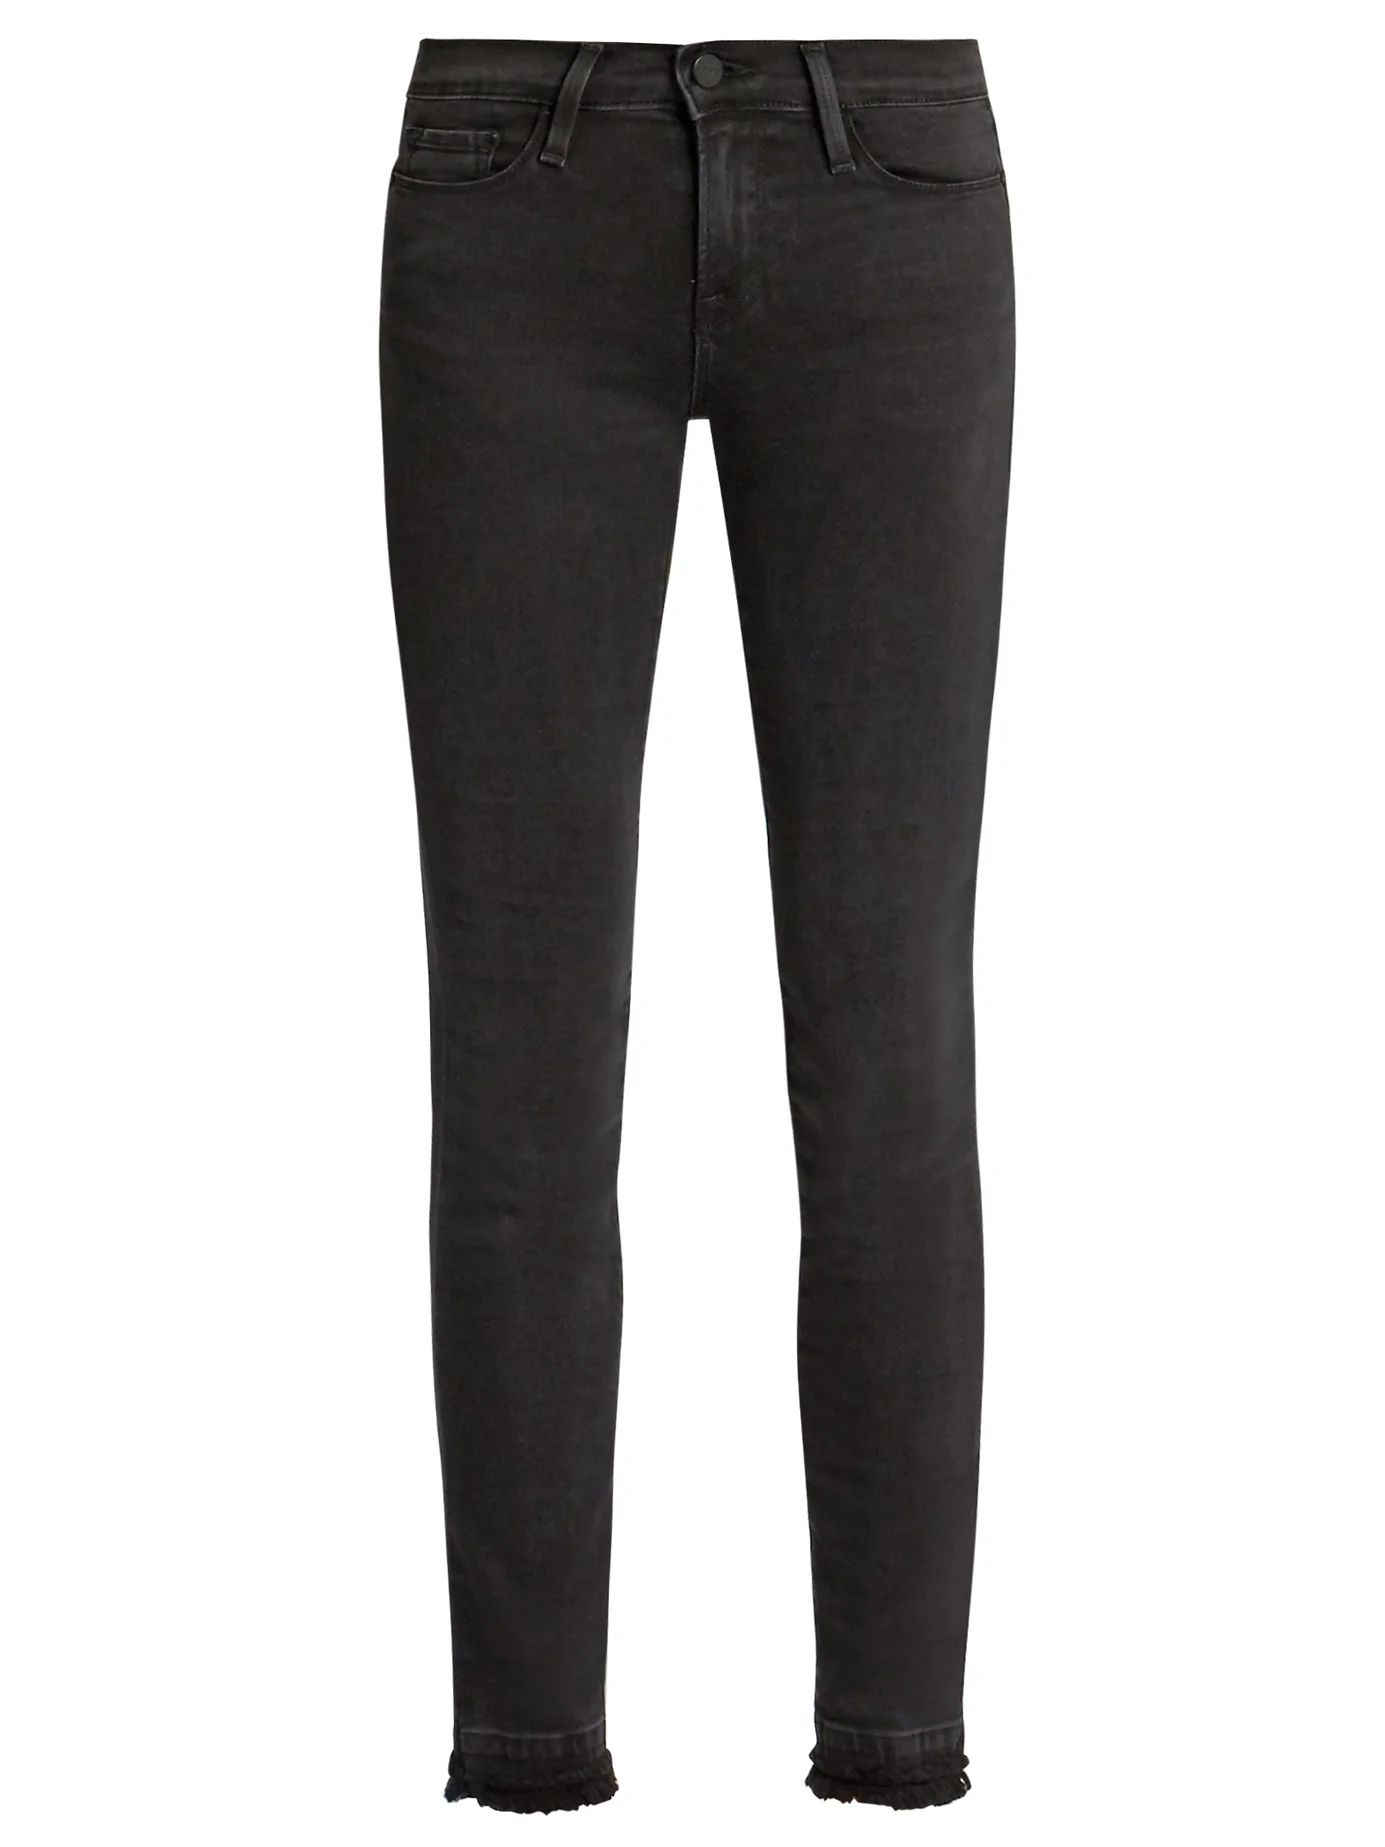 Whittier skinny jeans | Matches (US)